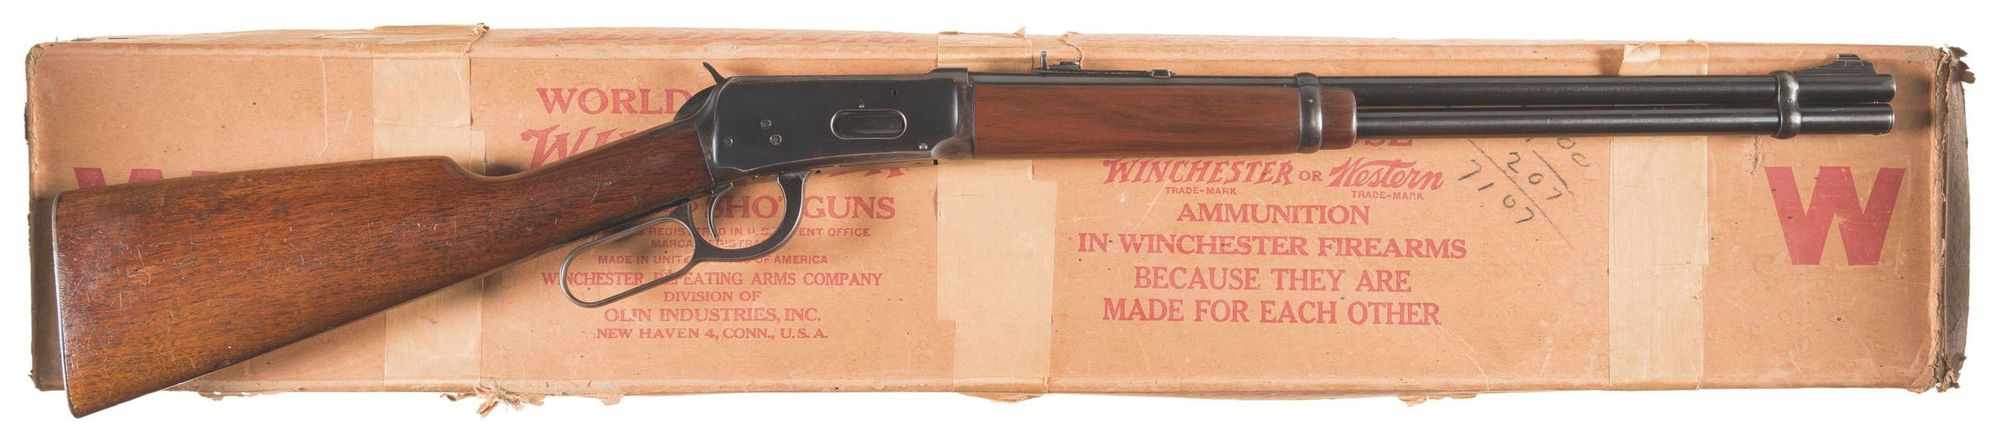 Lot 592: Winchester Model 94 Lever Action Carbine with Box